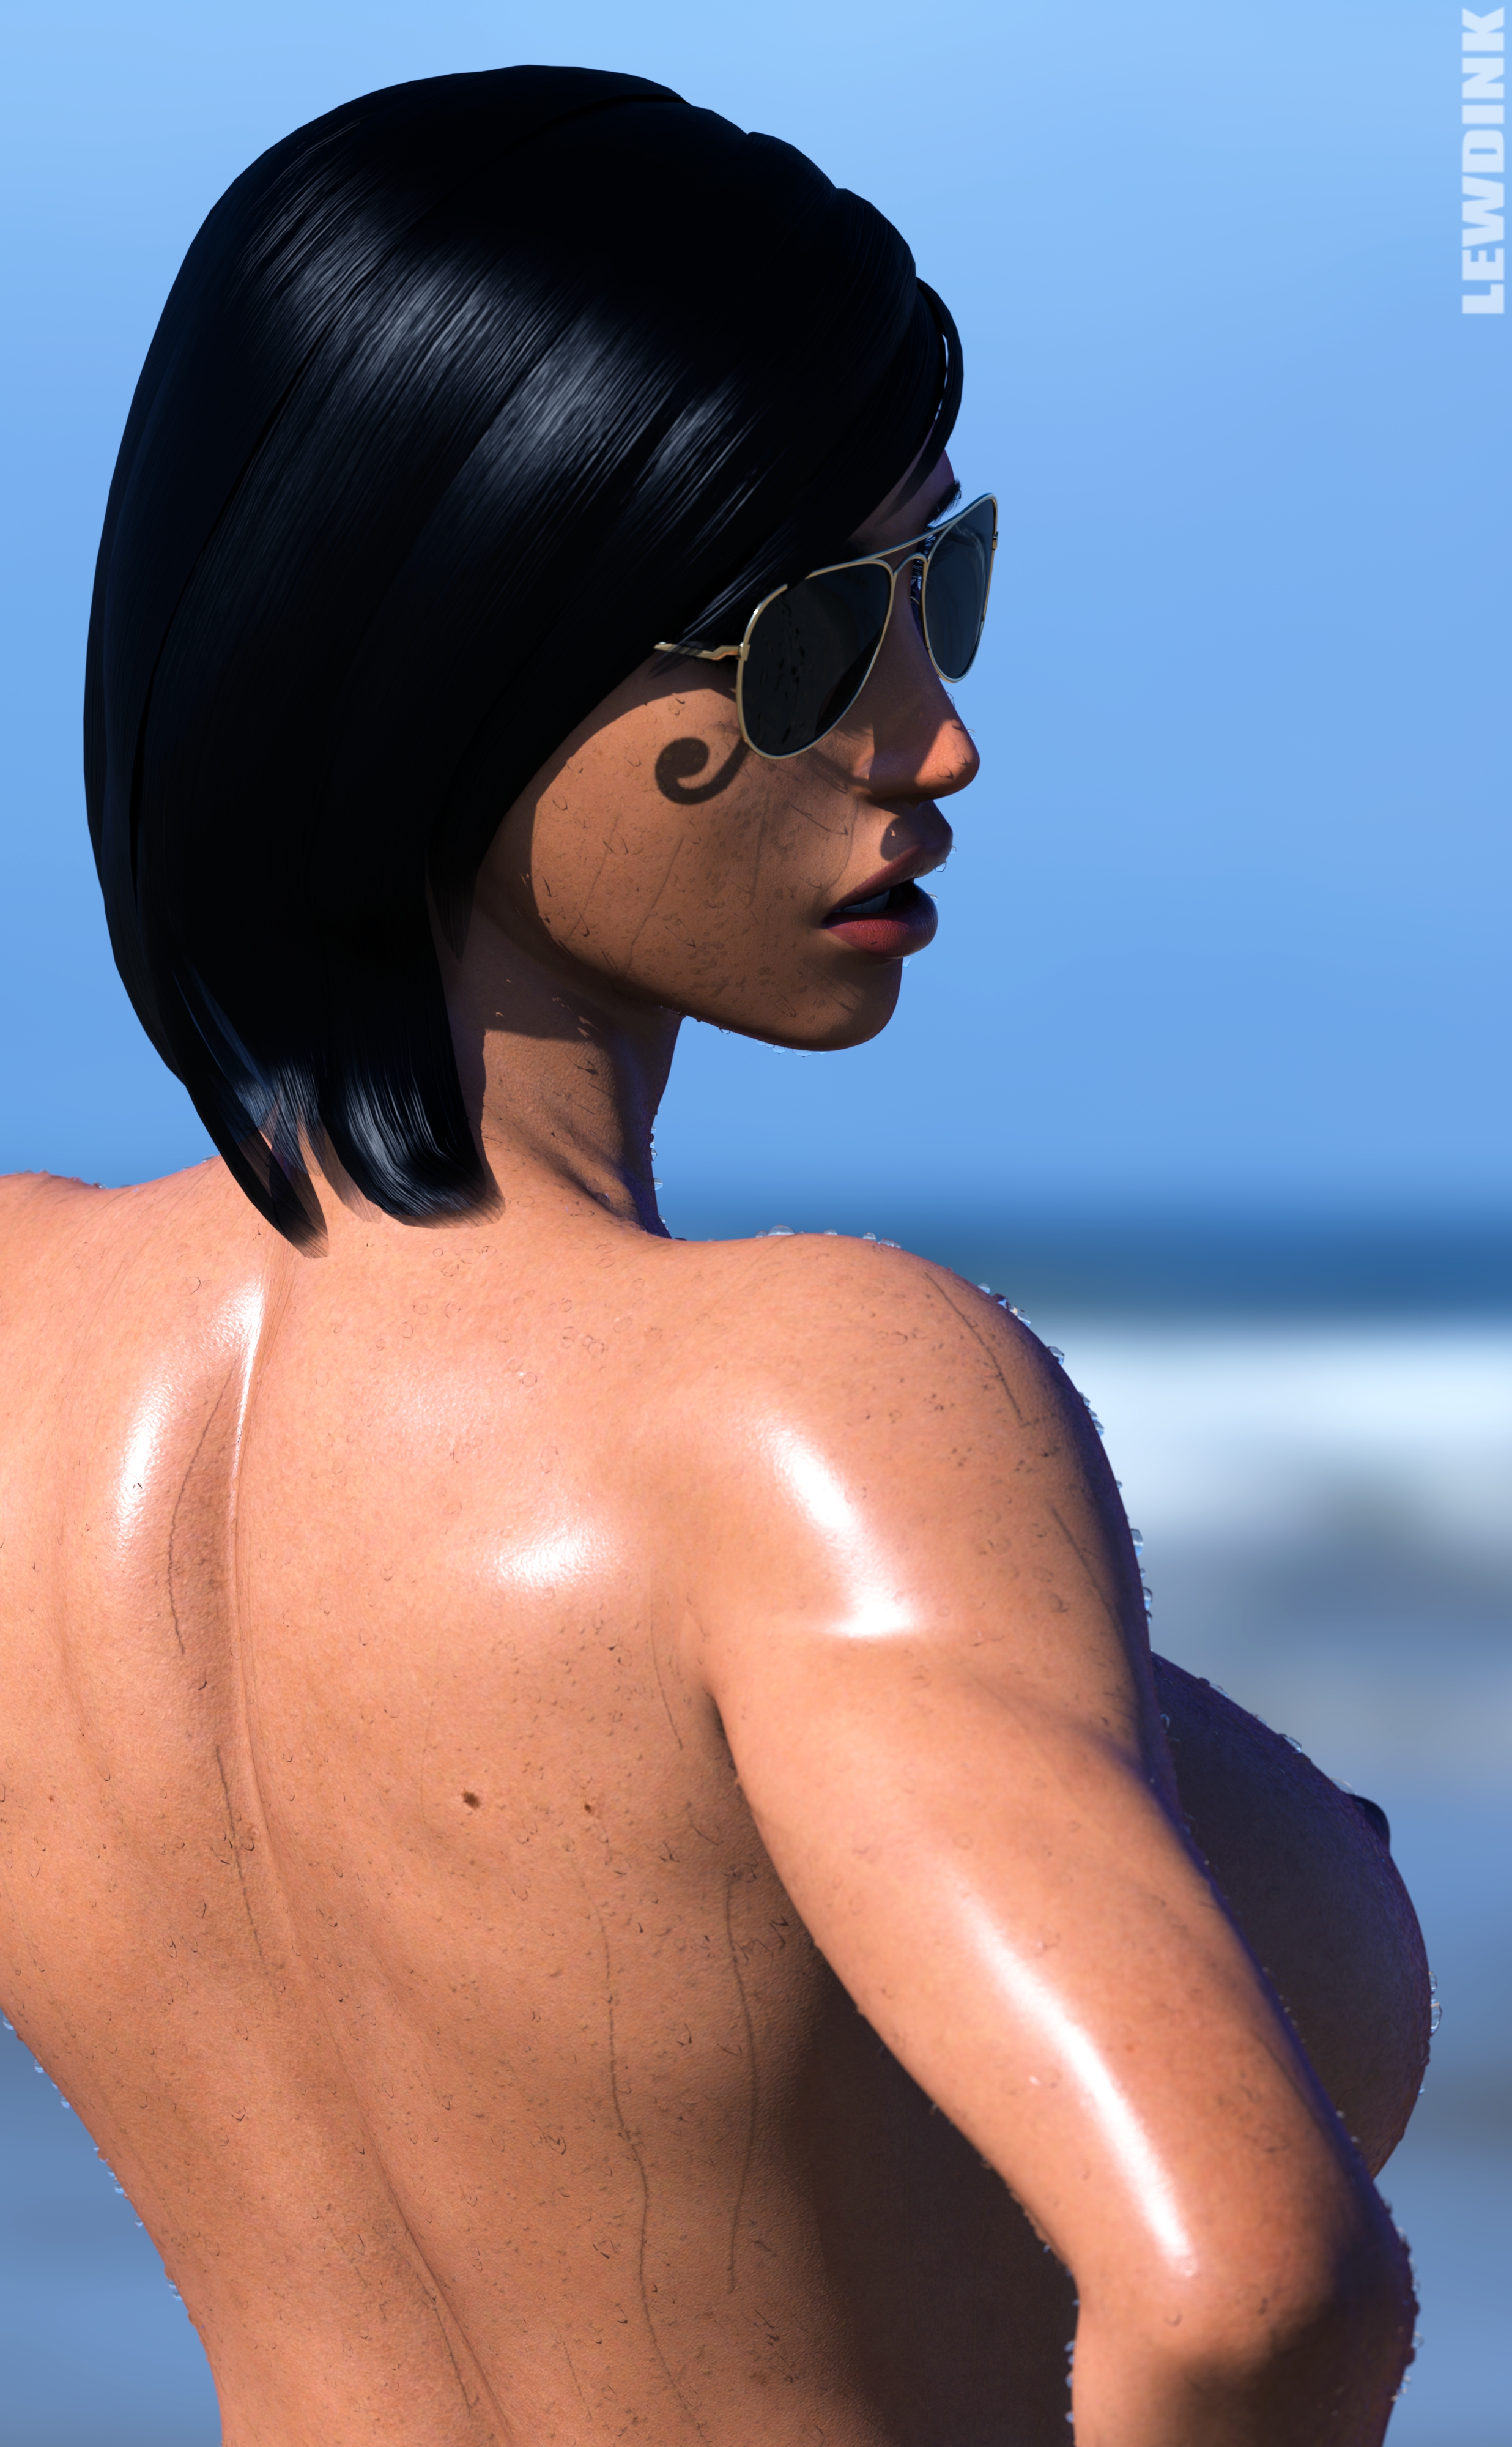 Pharah - Beach Pharah Pharah (overwatch) Overwatch Muscular Girl 3d Porn 3d Girl 3dnsfw 3dxgirls Abs Brunette Tattoo Tattoos Sexy Hot Bimbo Huge Boobs Huge Ass Huge Tits Muscles Musclegirl Pinup Animated Perfect Body Nude Nudes Big Booty Booty Ass Big Ass Nipple Piercing Piercing Belly Button Piercing Cowgirl Cowgirl Position Fuck Hard Sexyhot Lingerie Sexy Ass Sexy Lingerie Sexy Woman Fake Tits Lips Thong Beach Sunset Glasses Topless Big Tits Sweaty Standing 5